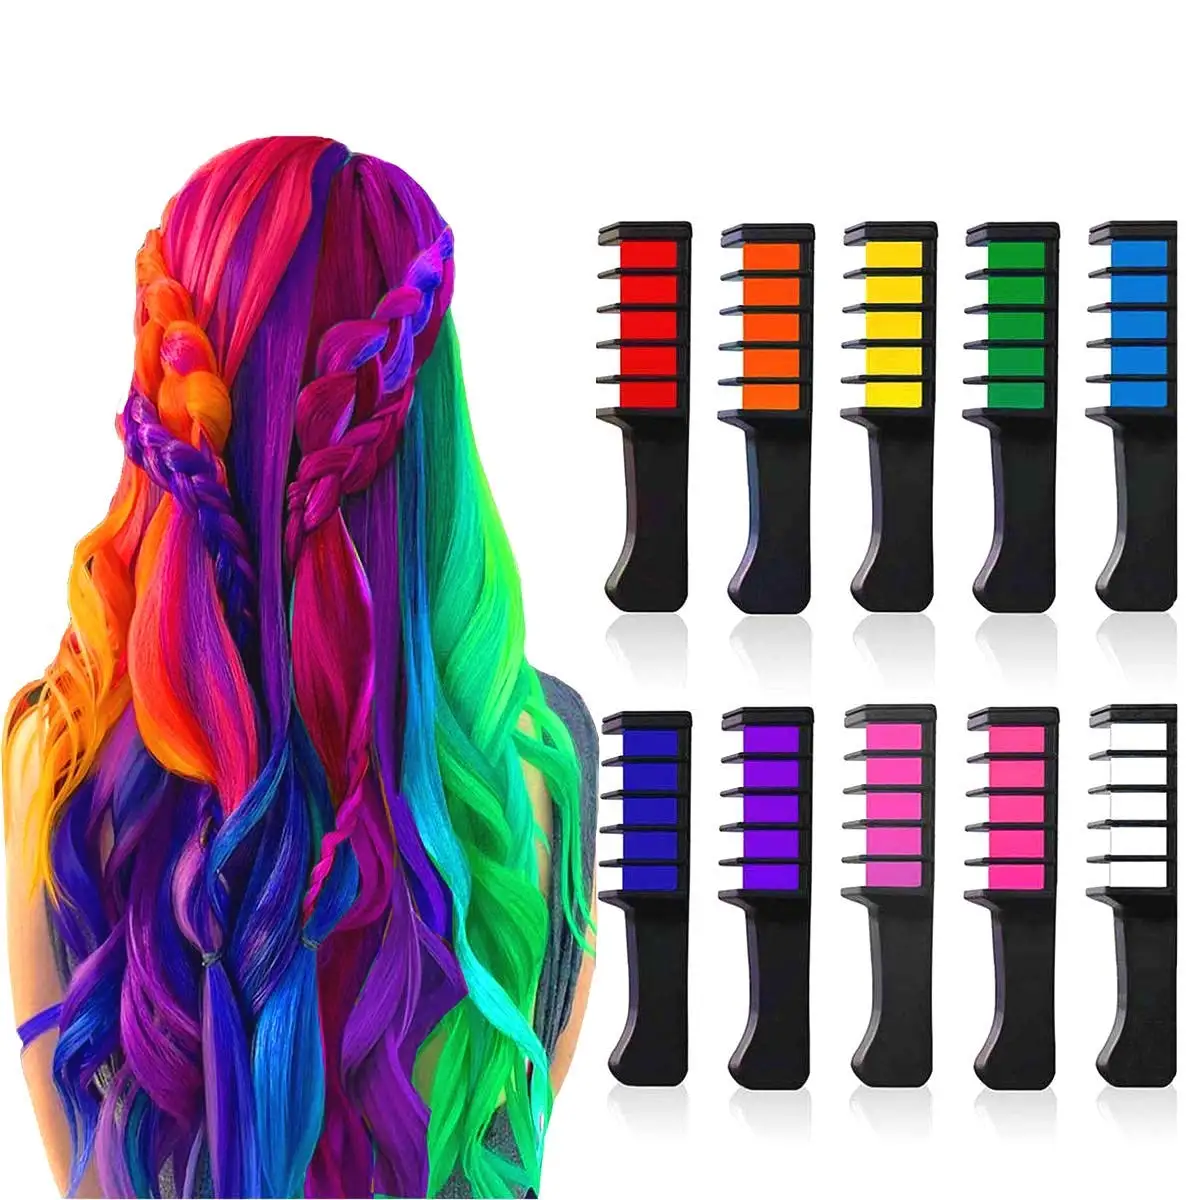 Hot Sale 10 Colors Hair Chalk For Girls Gift Ready For Shipping Hair Chalk  Comb - Buy Hair Chalk Comb For Cosplay,10 Colors Hair Chalk,Girls Gift  Product on 